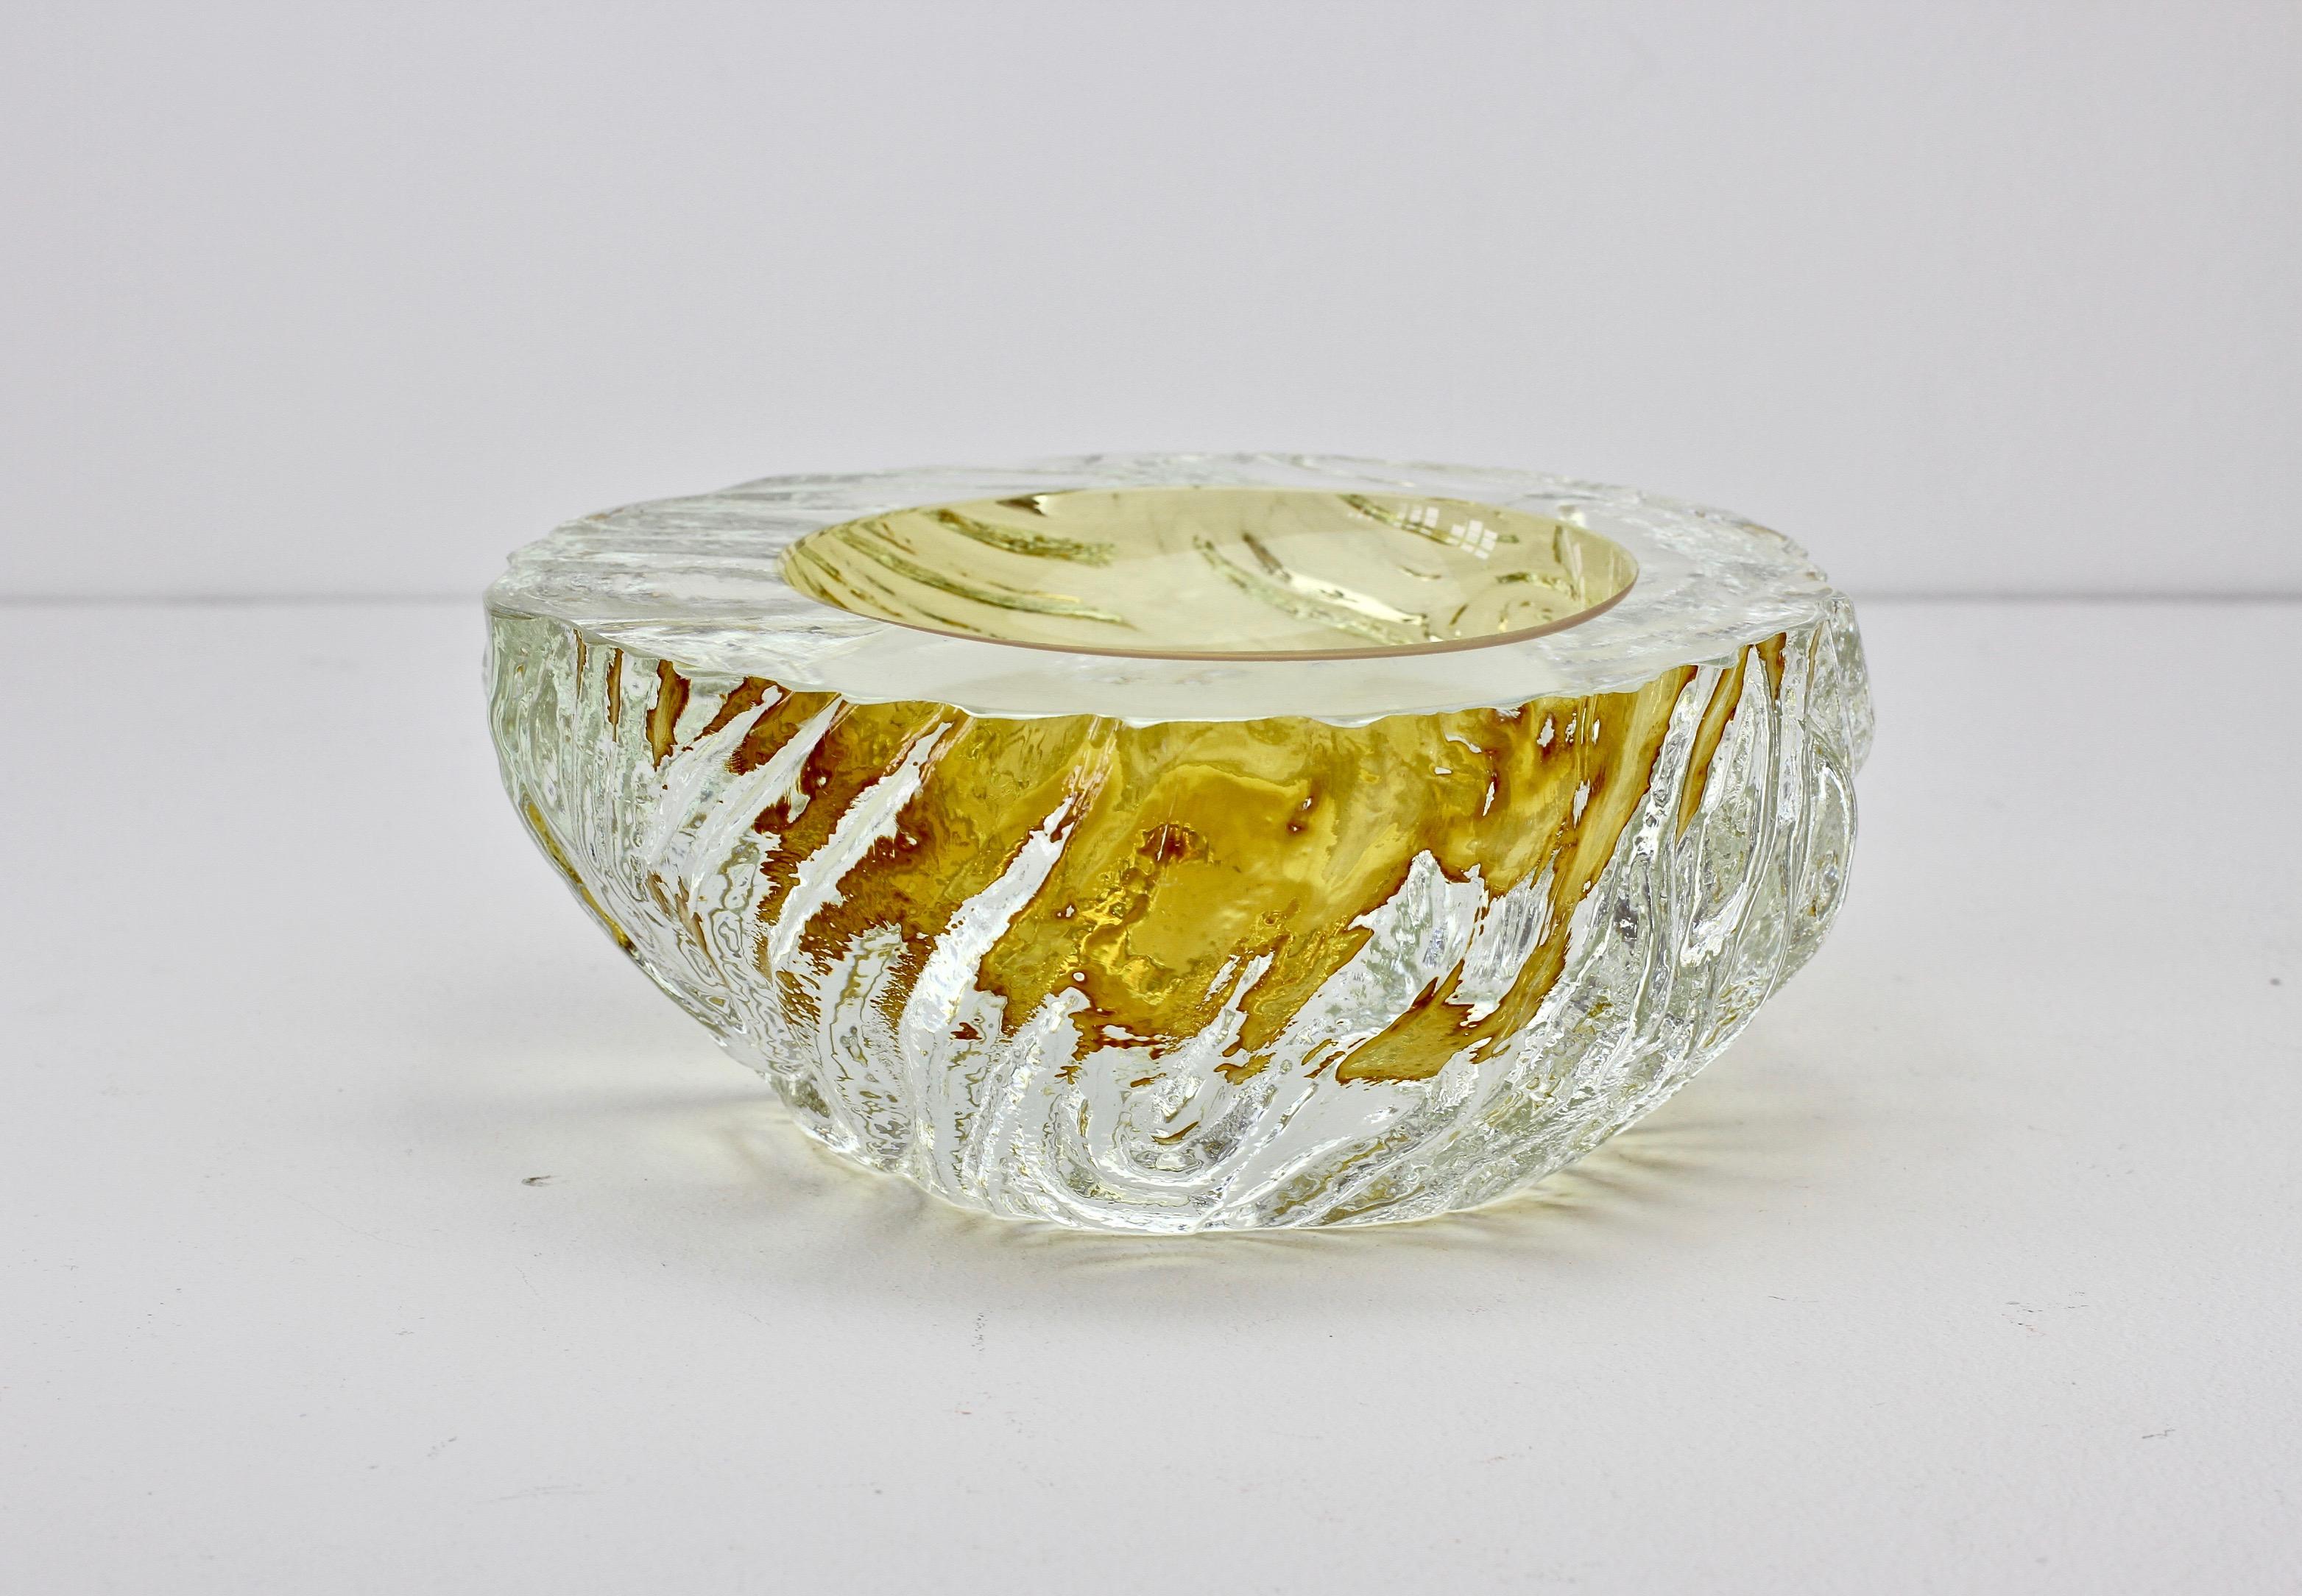 Large vintage textured Italian glass bowl or dish attributed to Maurizio Arabella for Seguso Vetri d'Arte Murano, Italy, circa late  1970s / 1980s. Elegant in form and showing extraordinary craftmanship with the use of the 'Sommerso' technique with